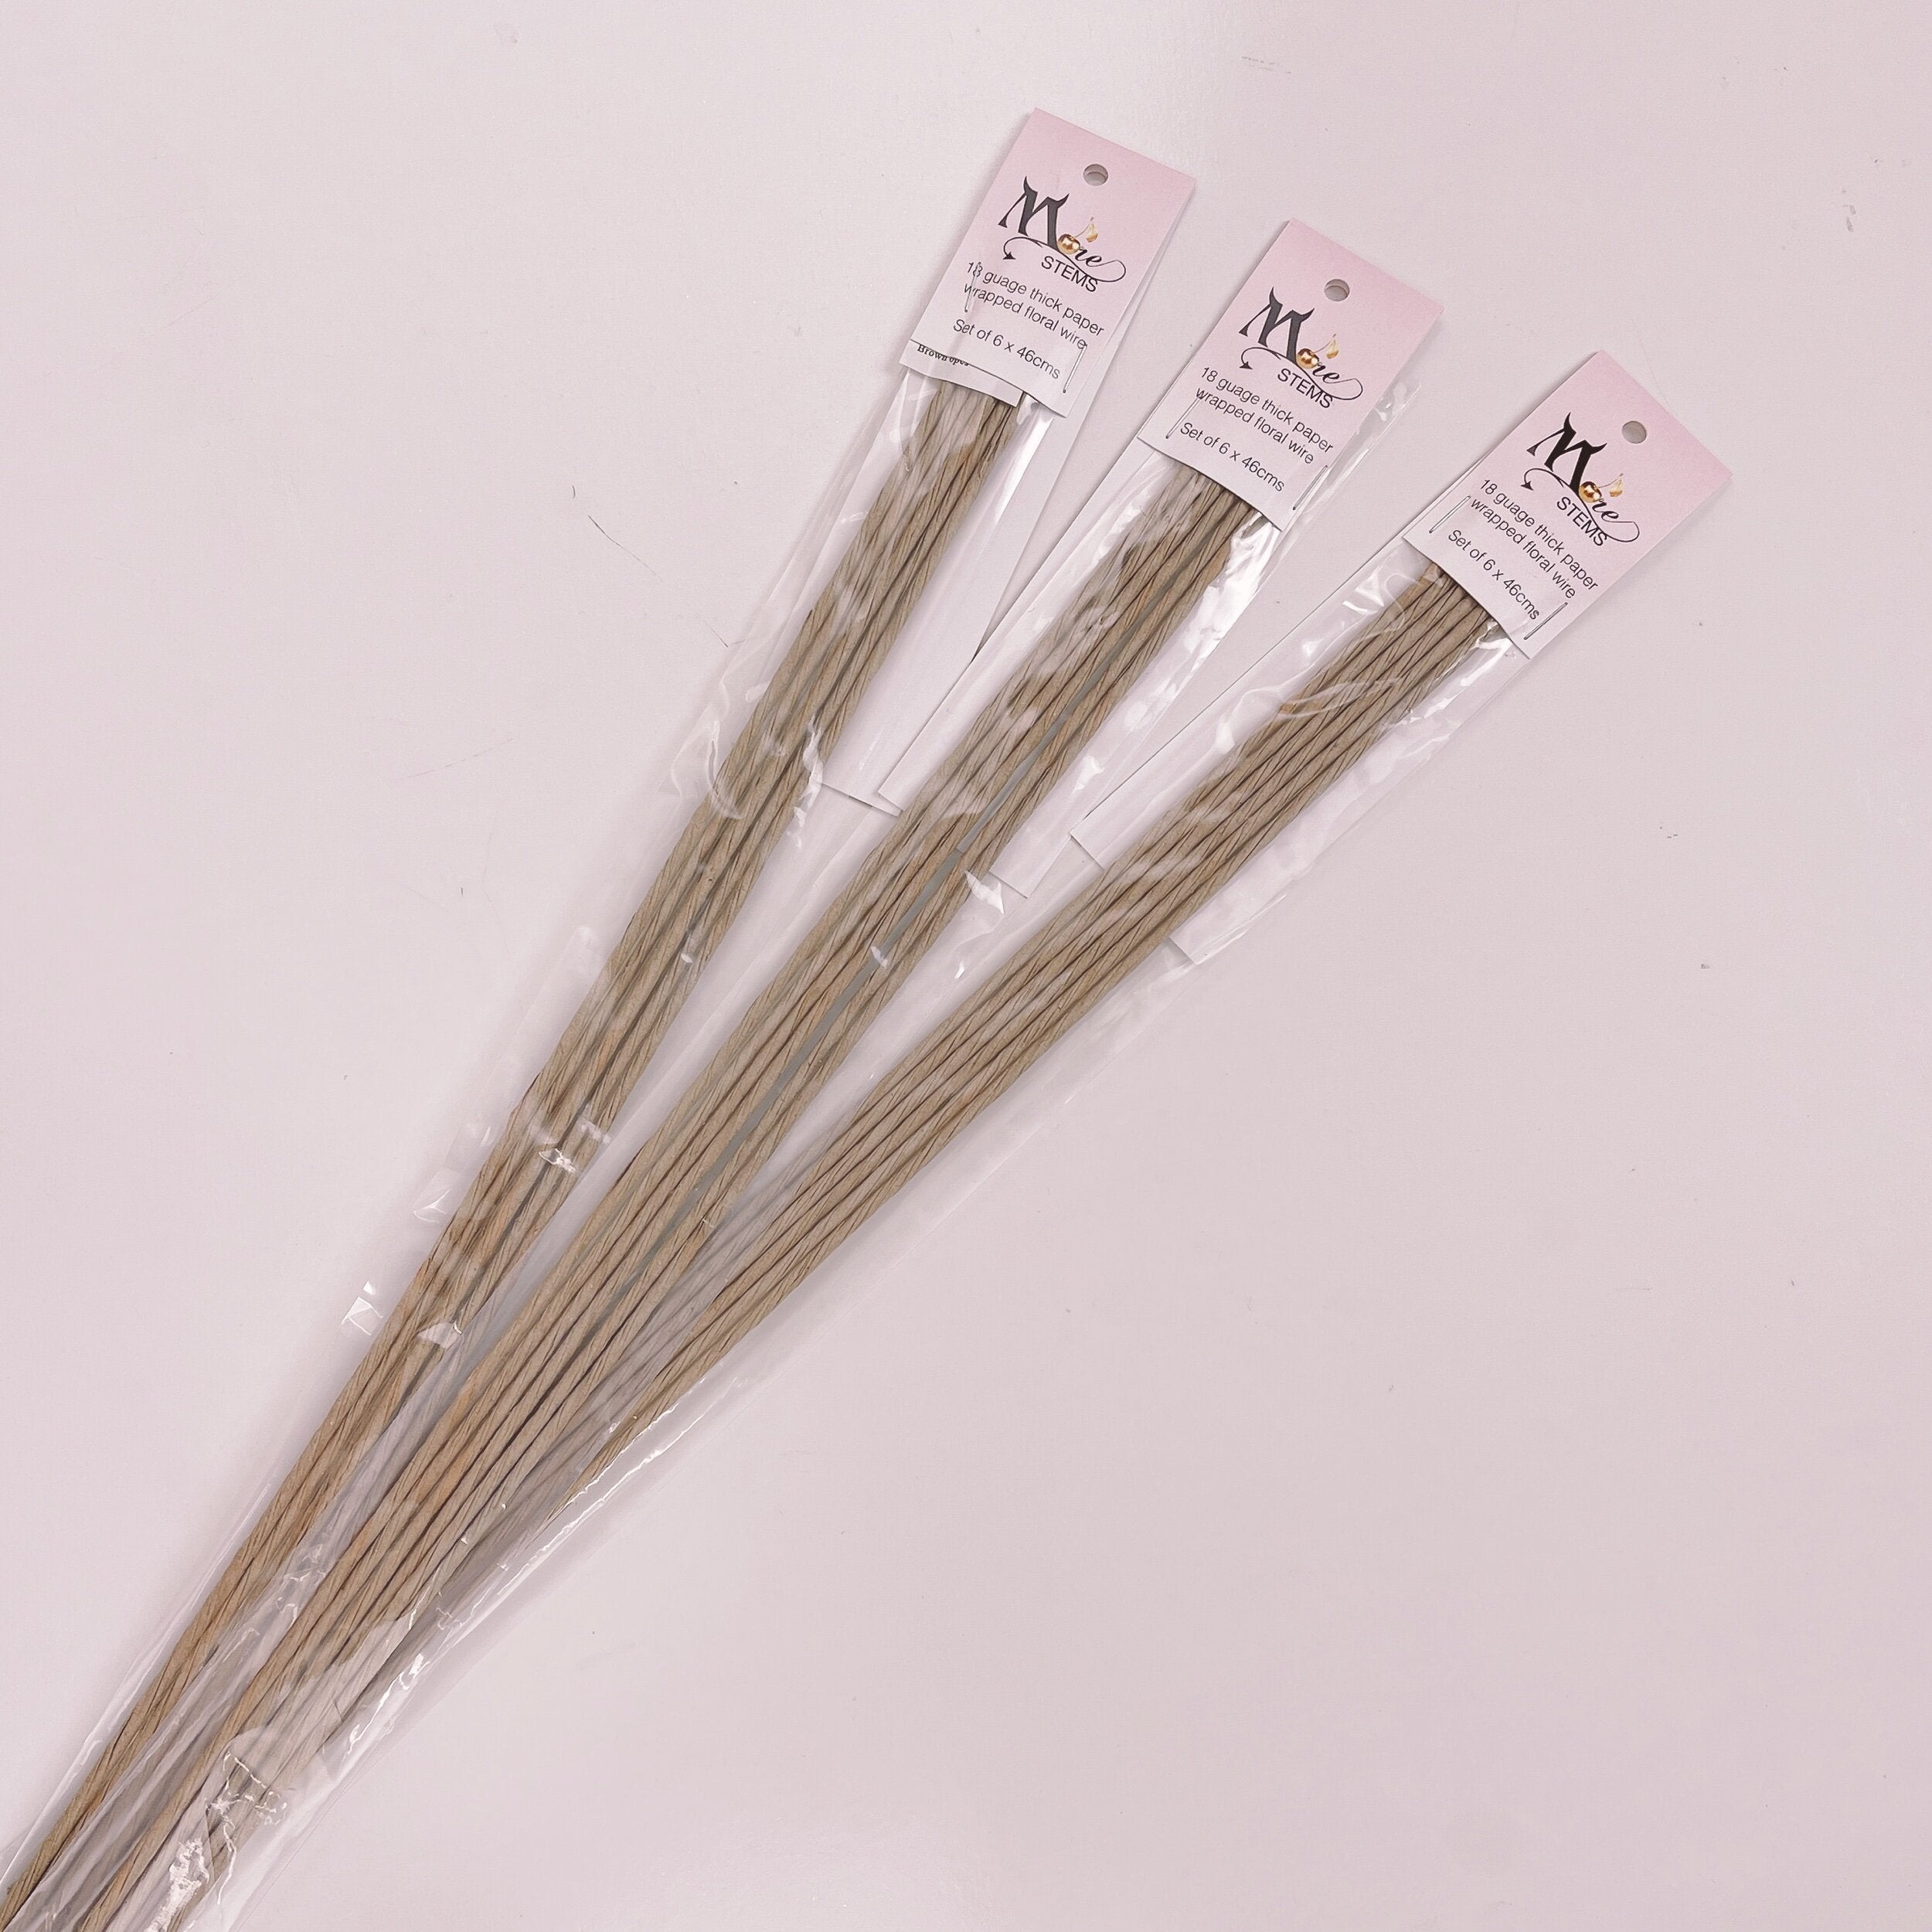 More Stems 18 Gauge Wires – Sweet Life Cake Supply